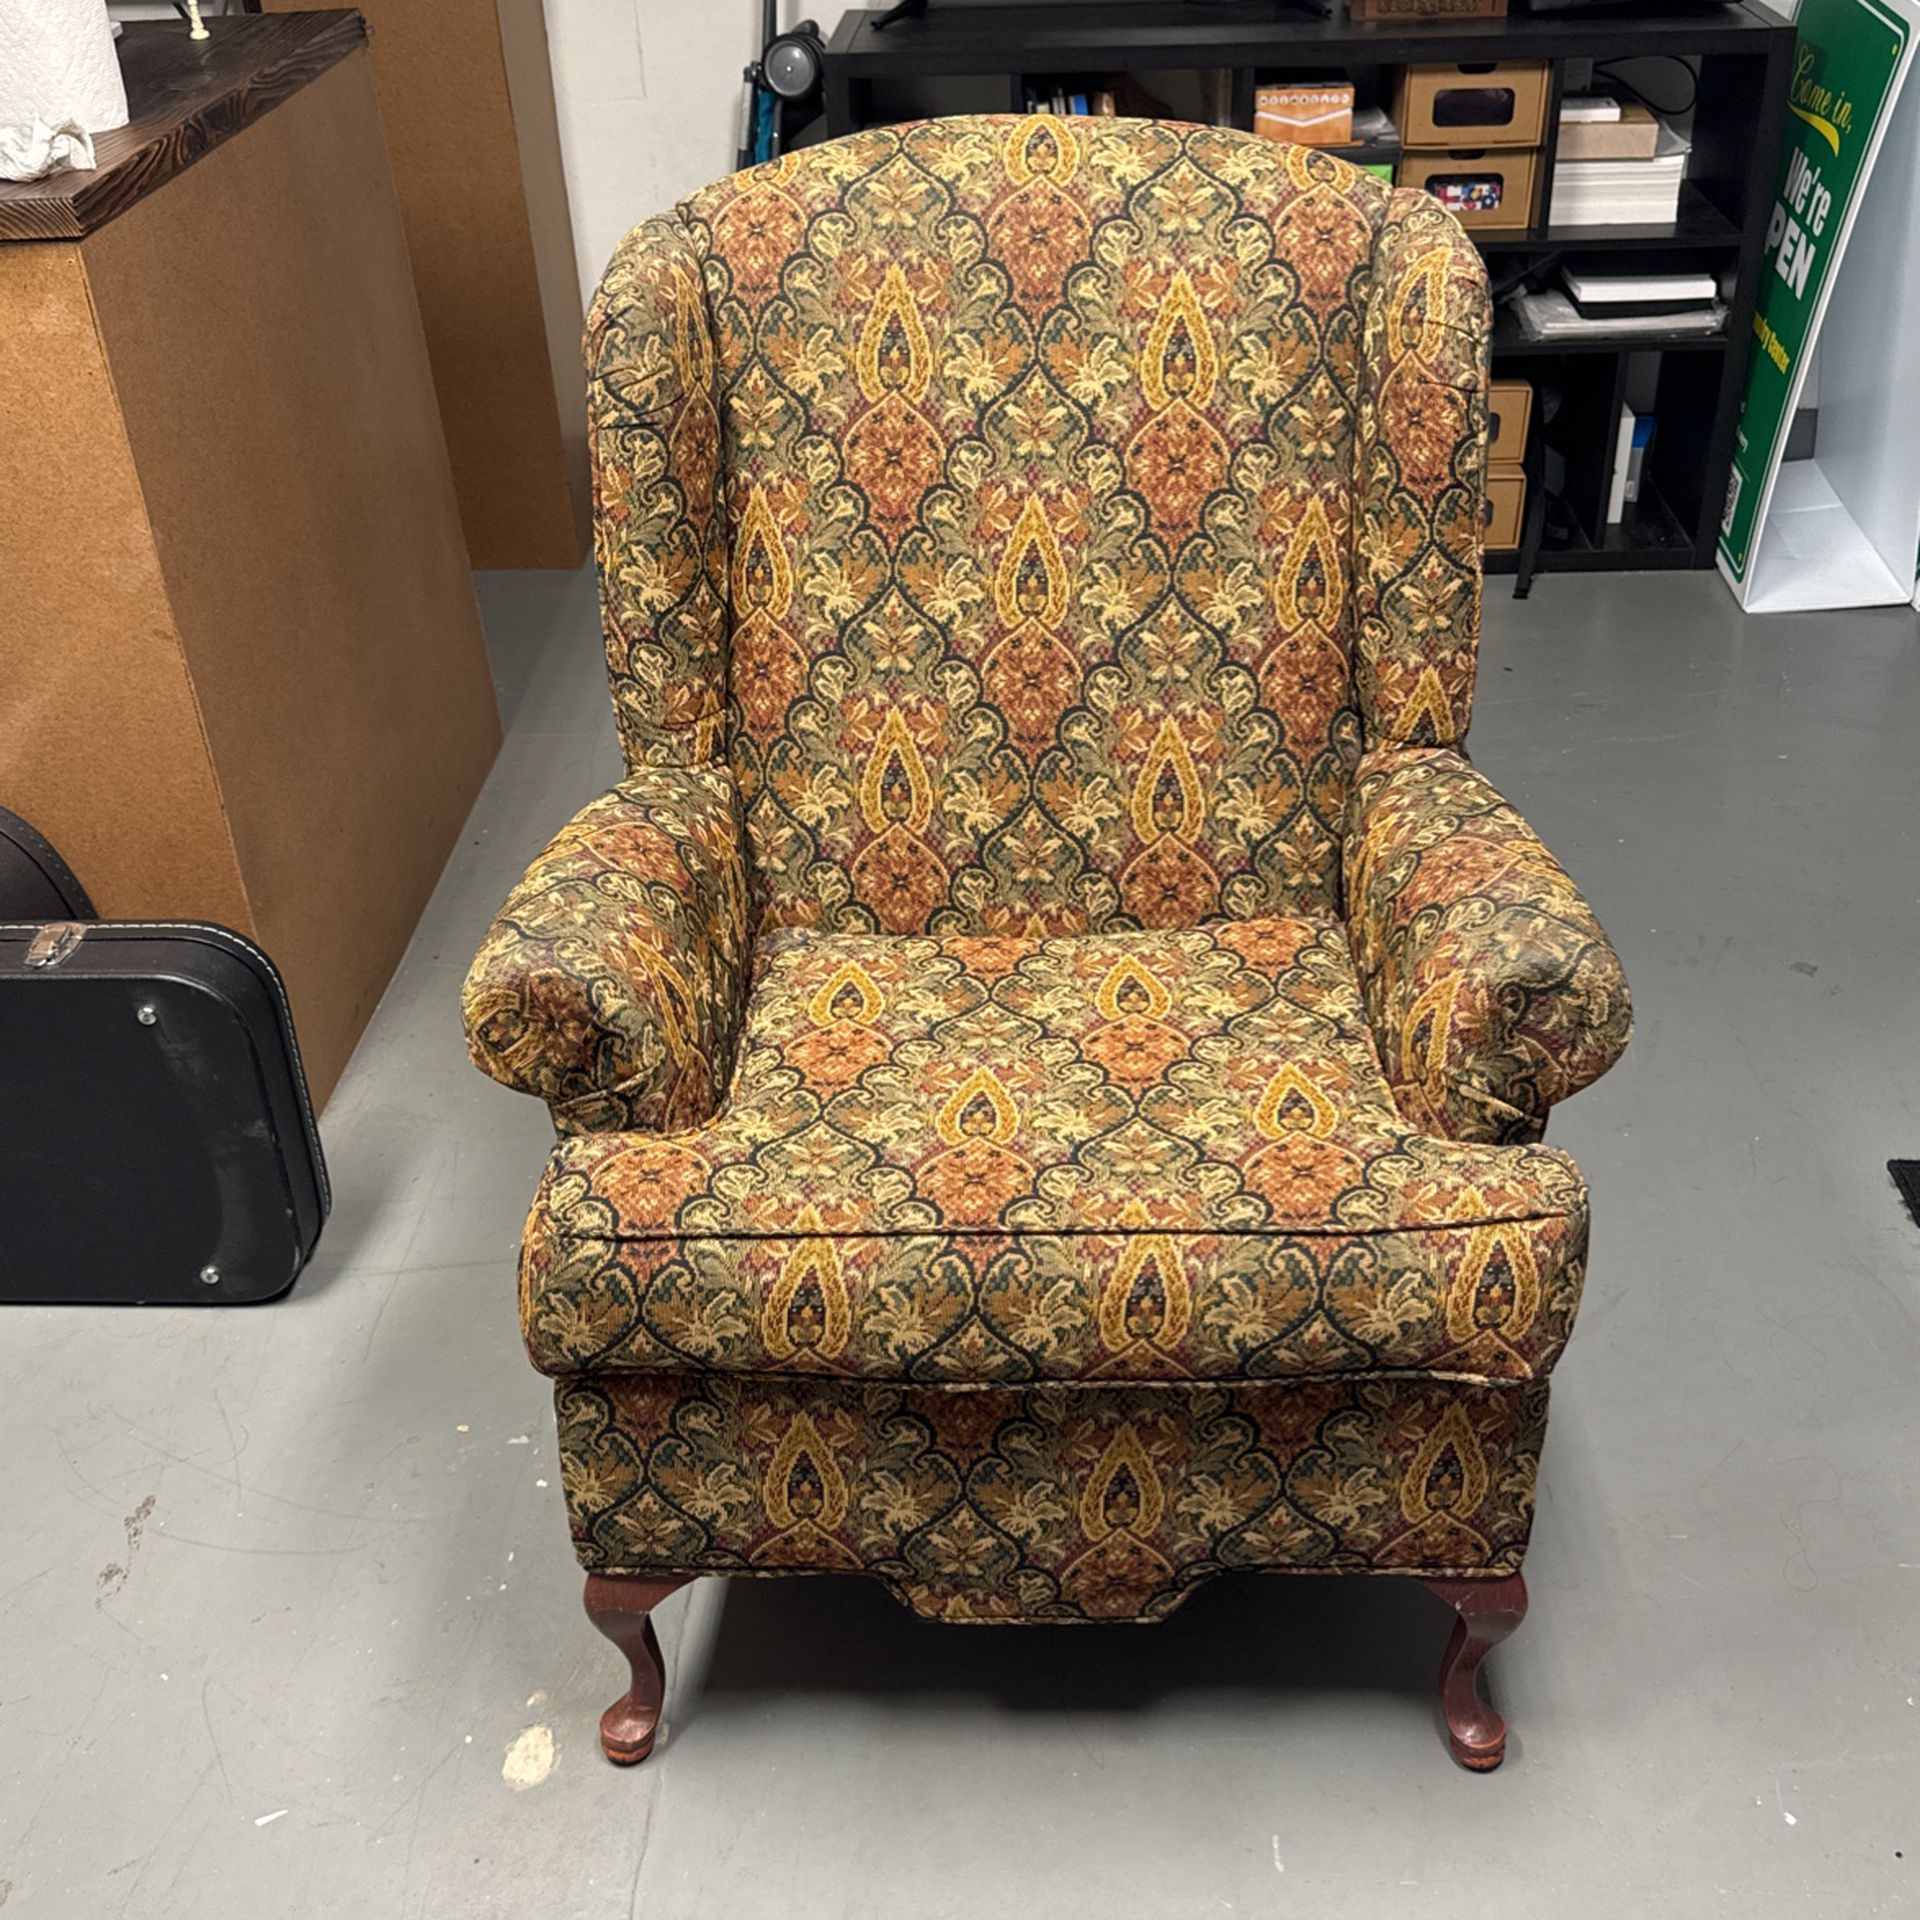 Vintage Sofa Chair | Delivery Included